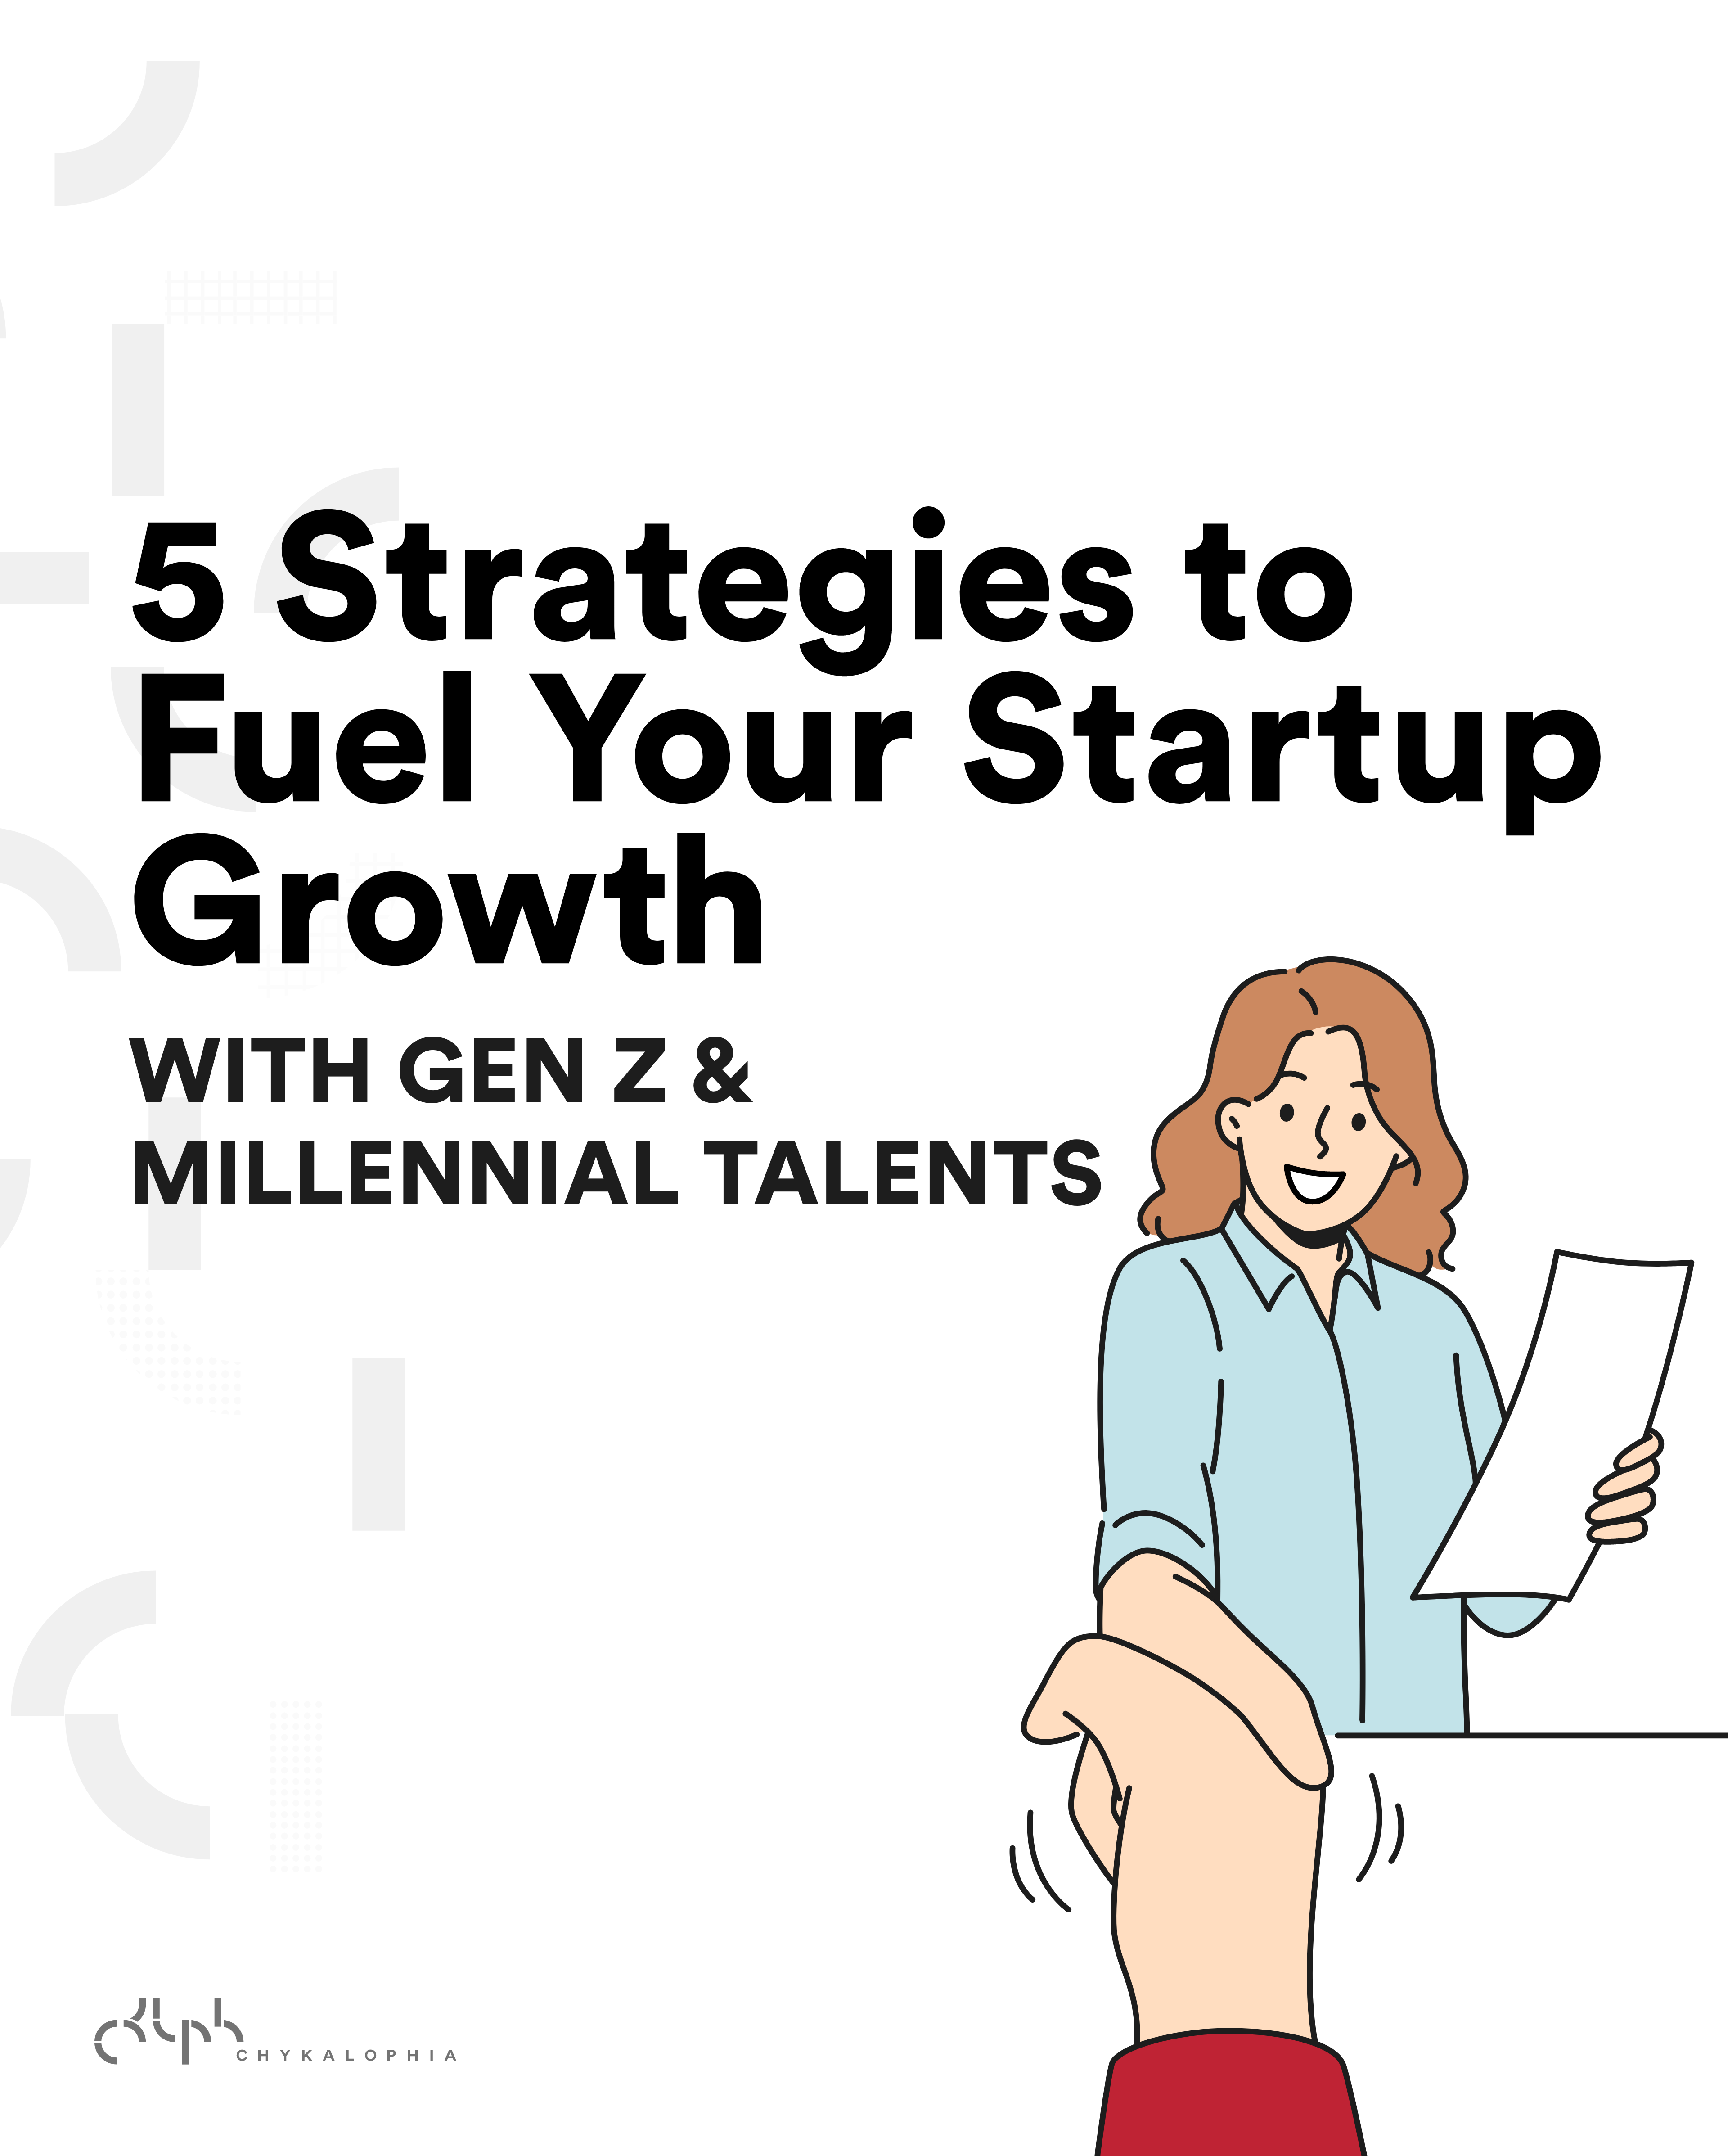 Fuel your startup growth with gen z talents and millennial talents using 5 strategies